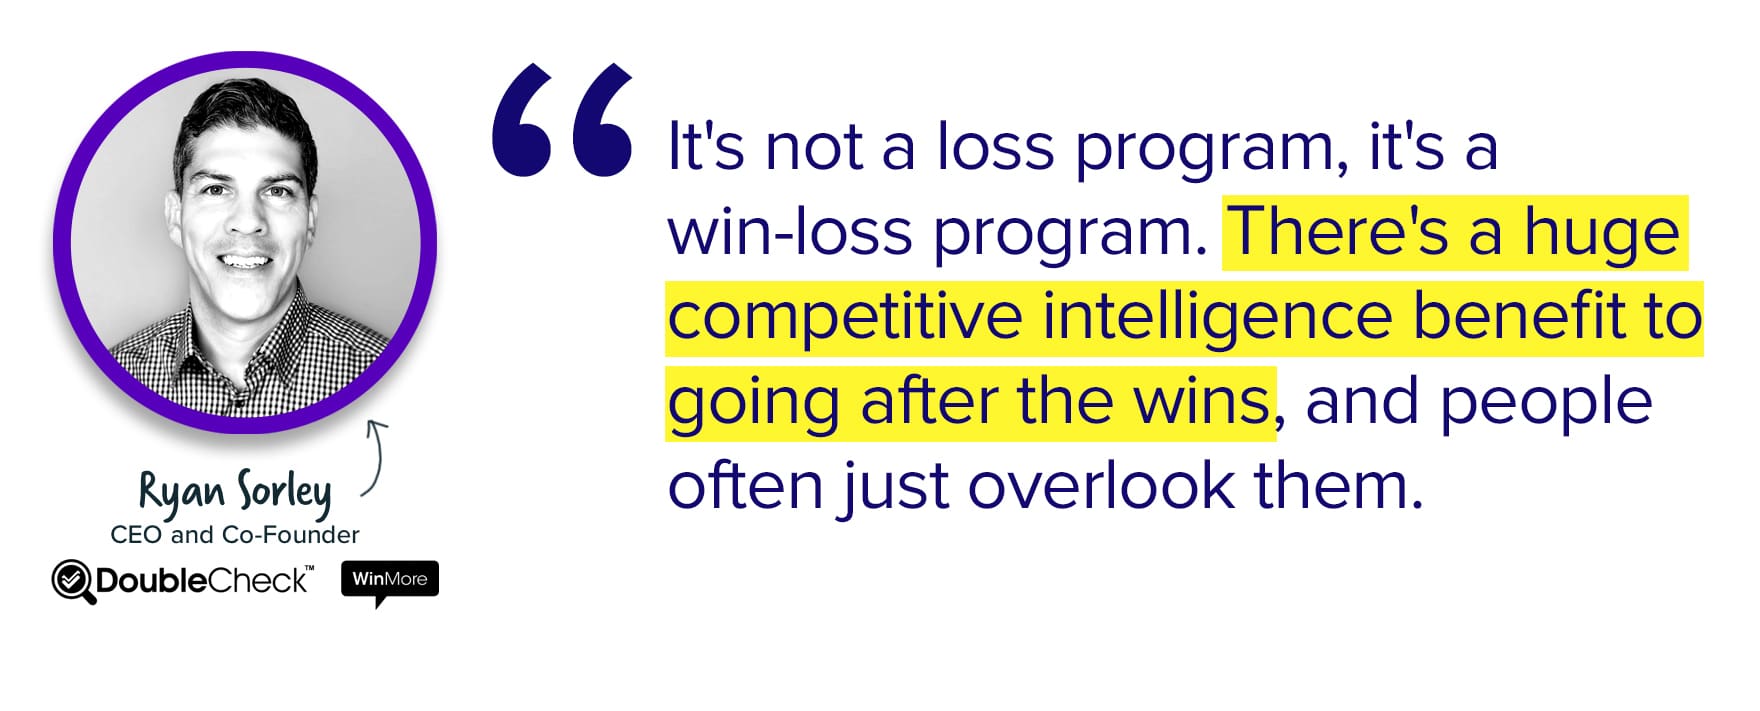 b2b win-loss program analysis quote from Ryan Sorley CEO at doublecheck research